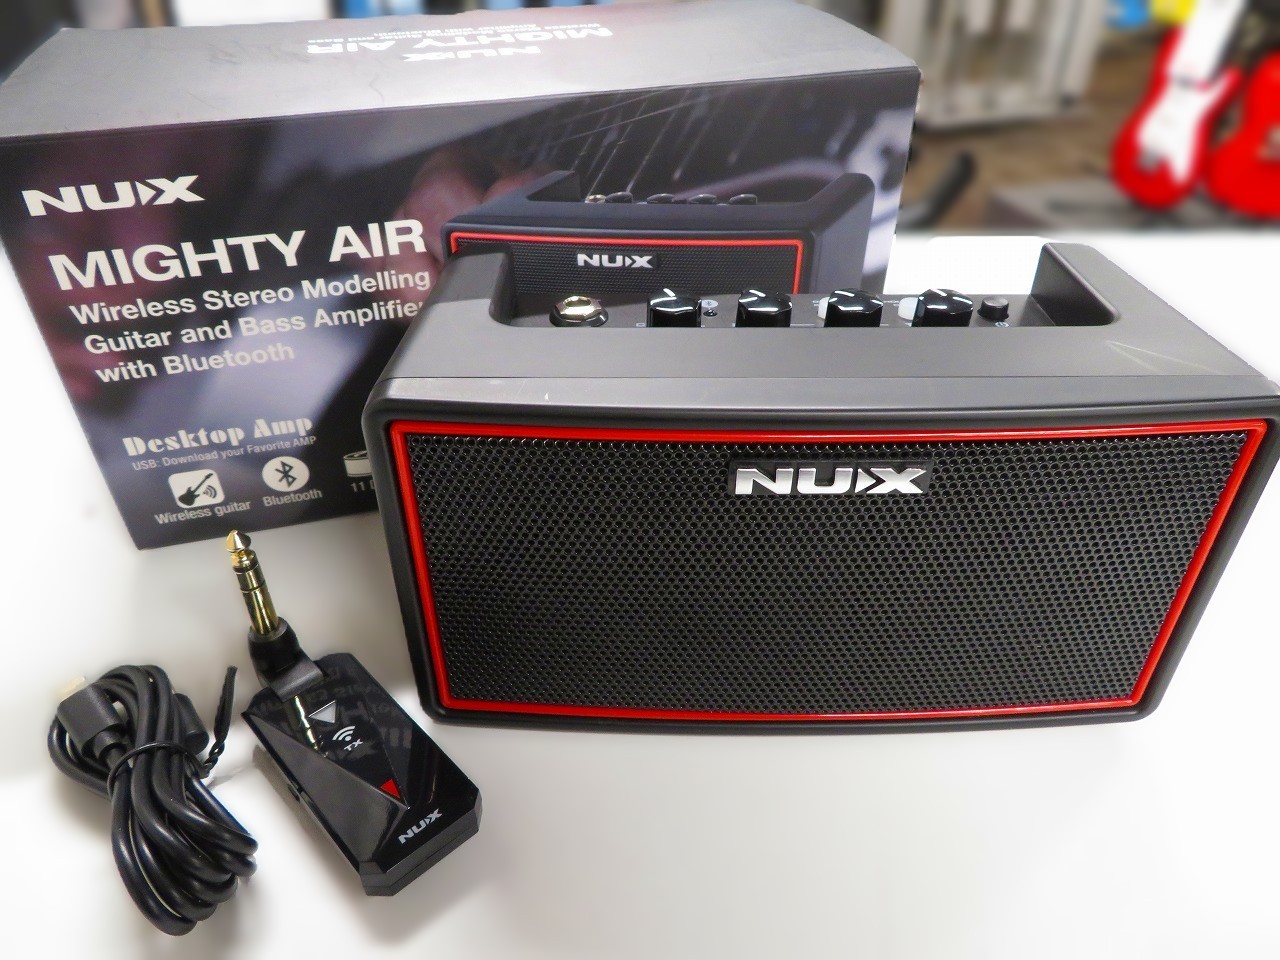 NUX Mighty Air ワイヤレス アンプ-